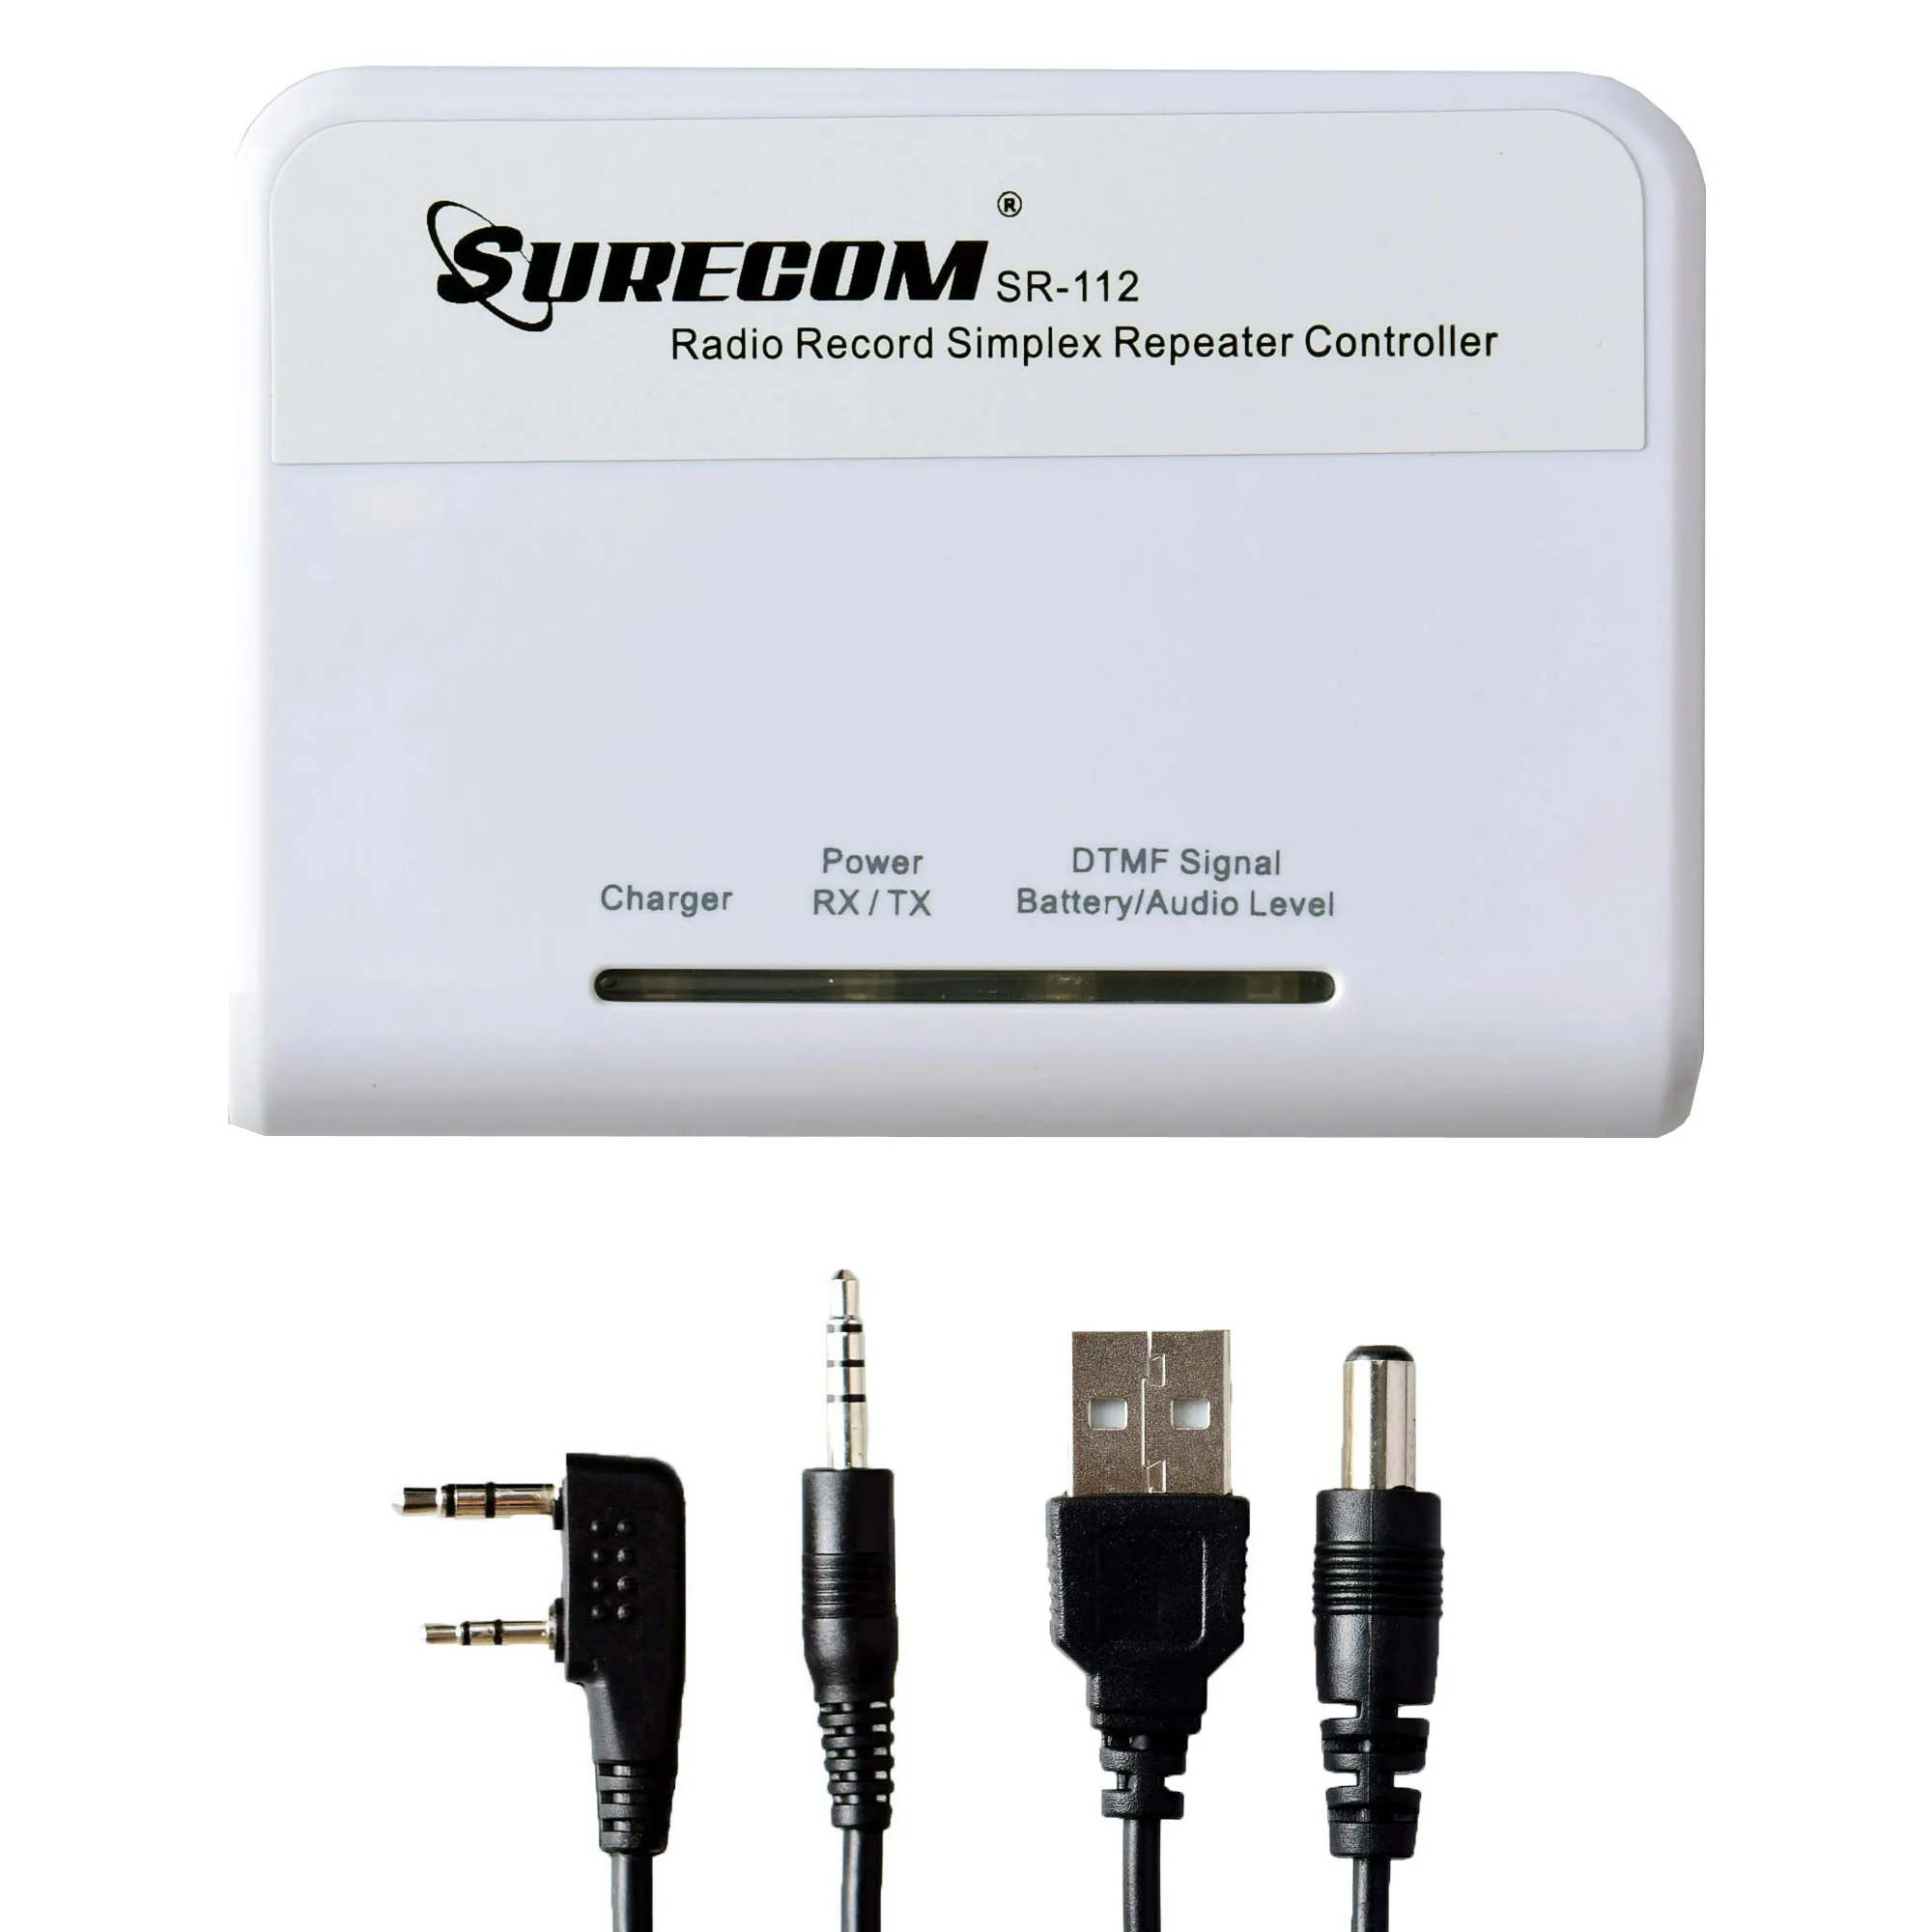 

Surecom SR-112 Radio Record Simplex Repeater Controller with Cable for Mobile&Ham Radio Walkie Talkie